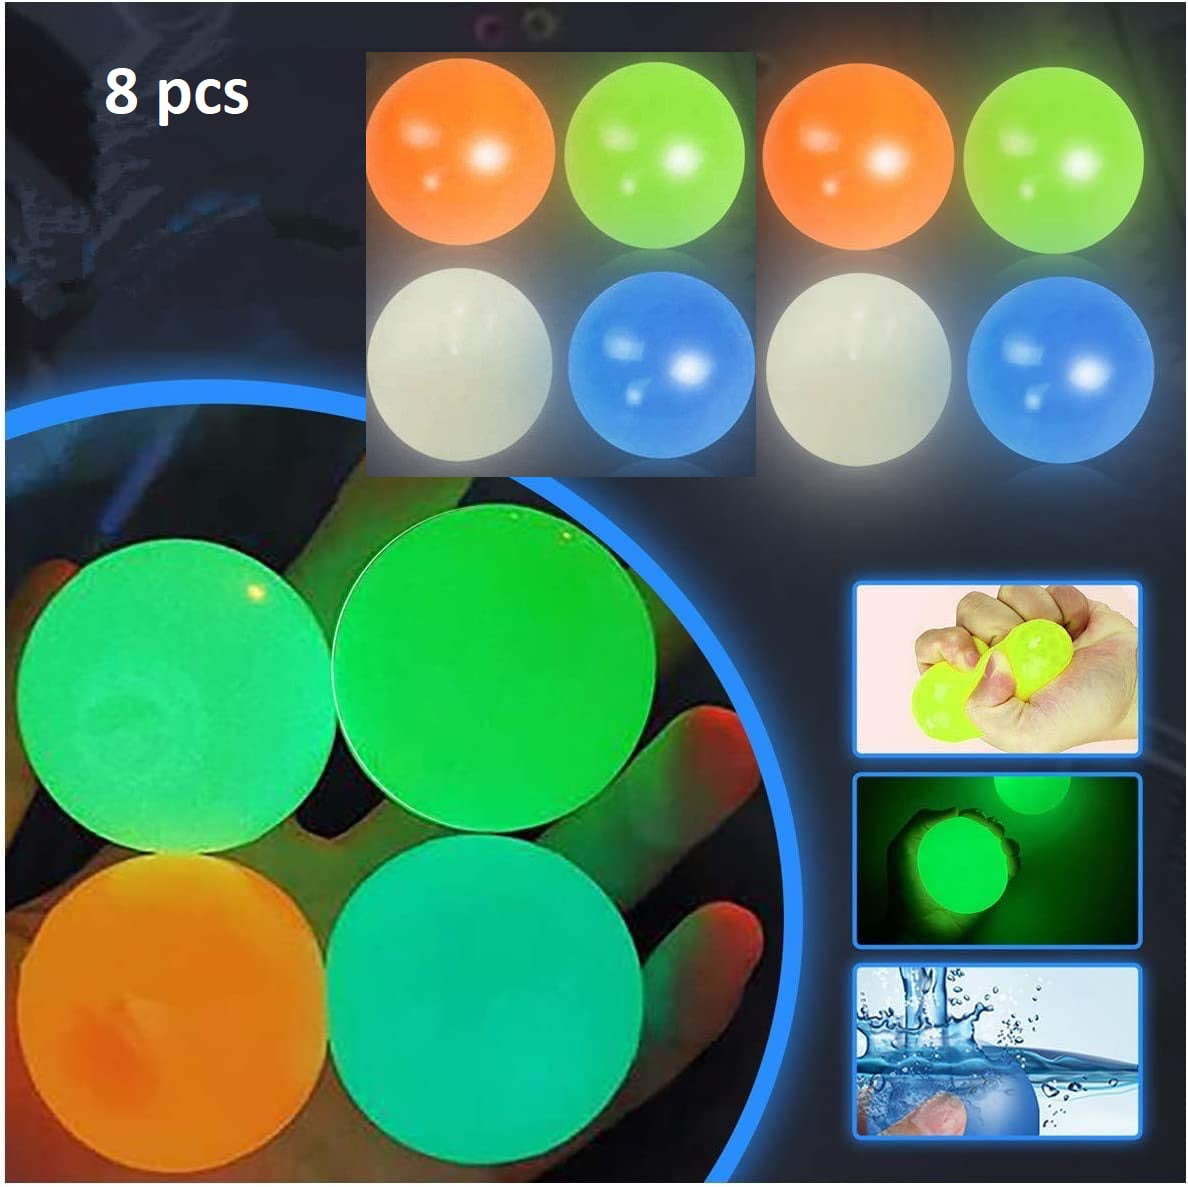 8 Pcs Slingshot Chicken,Stress Balls Glow Sticky Balls Squishy Toys Toys Sensory Toys Stress Toys-Stick to The Wall Ceiling That Stick to The Ceiling 8 Pcs Ceiling Balls Glow in The Dark